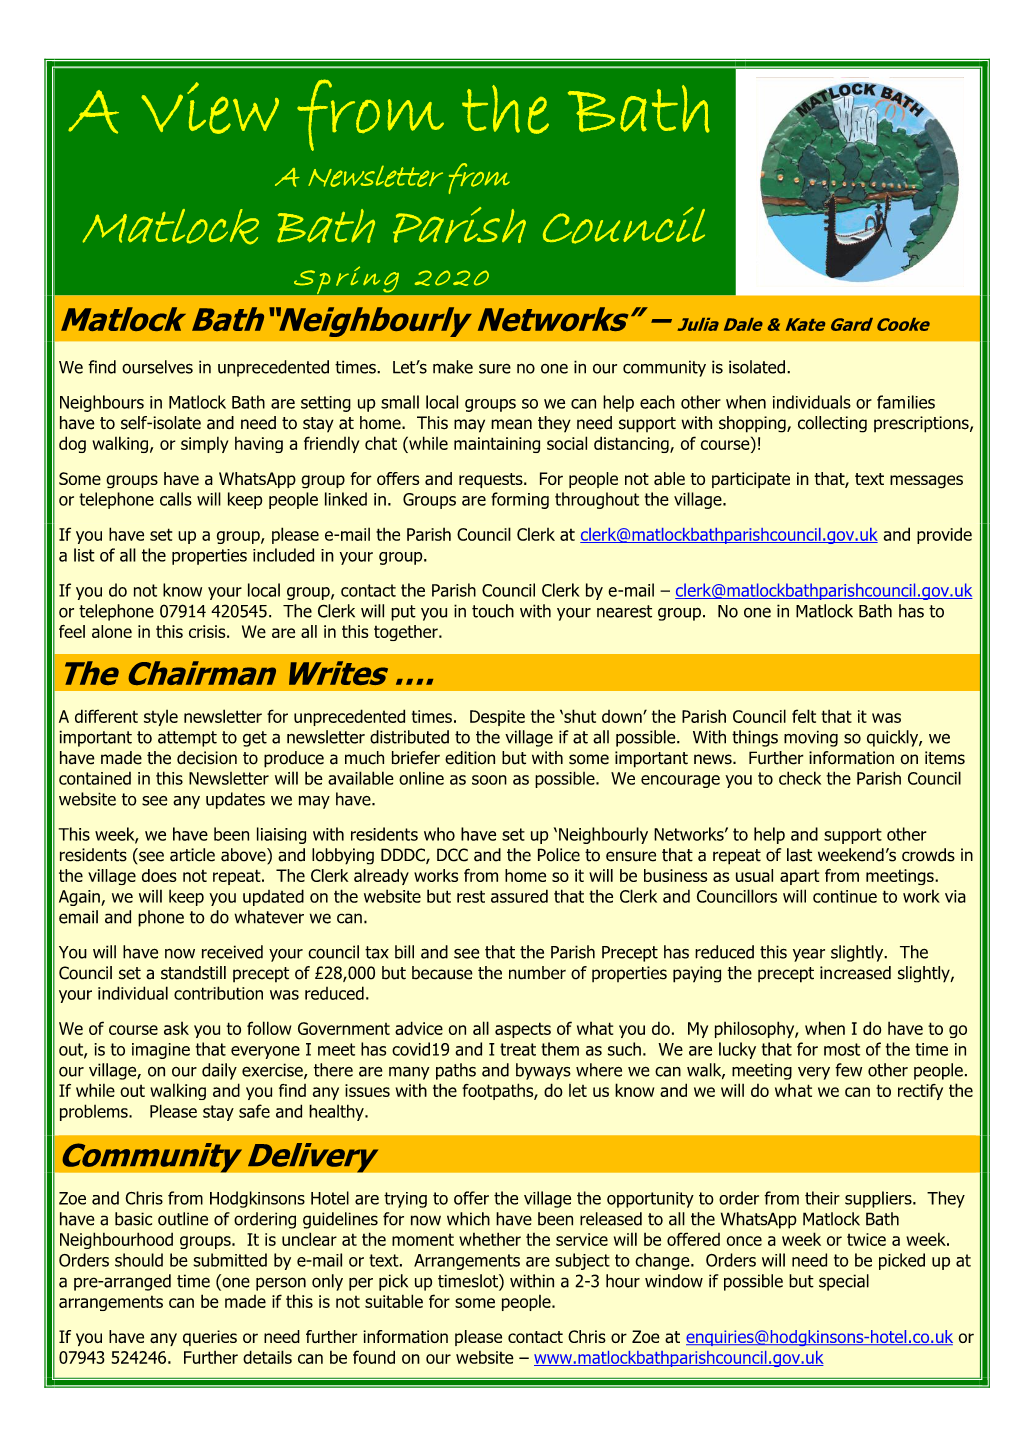 A View from the Bath a Newsletter from Matlock Bath Parish Council Spring 2020